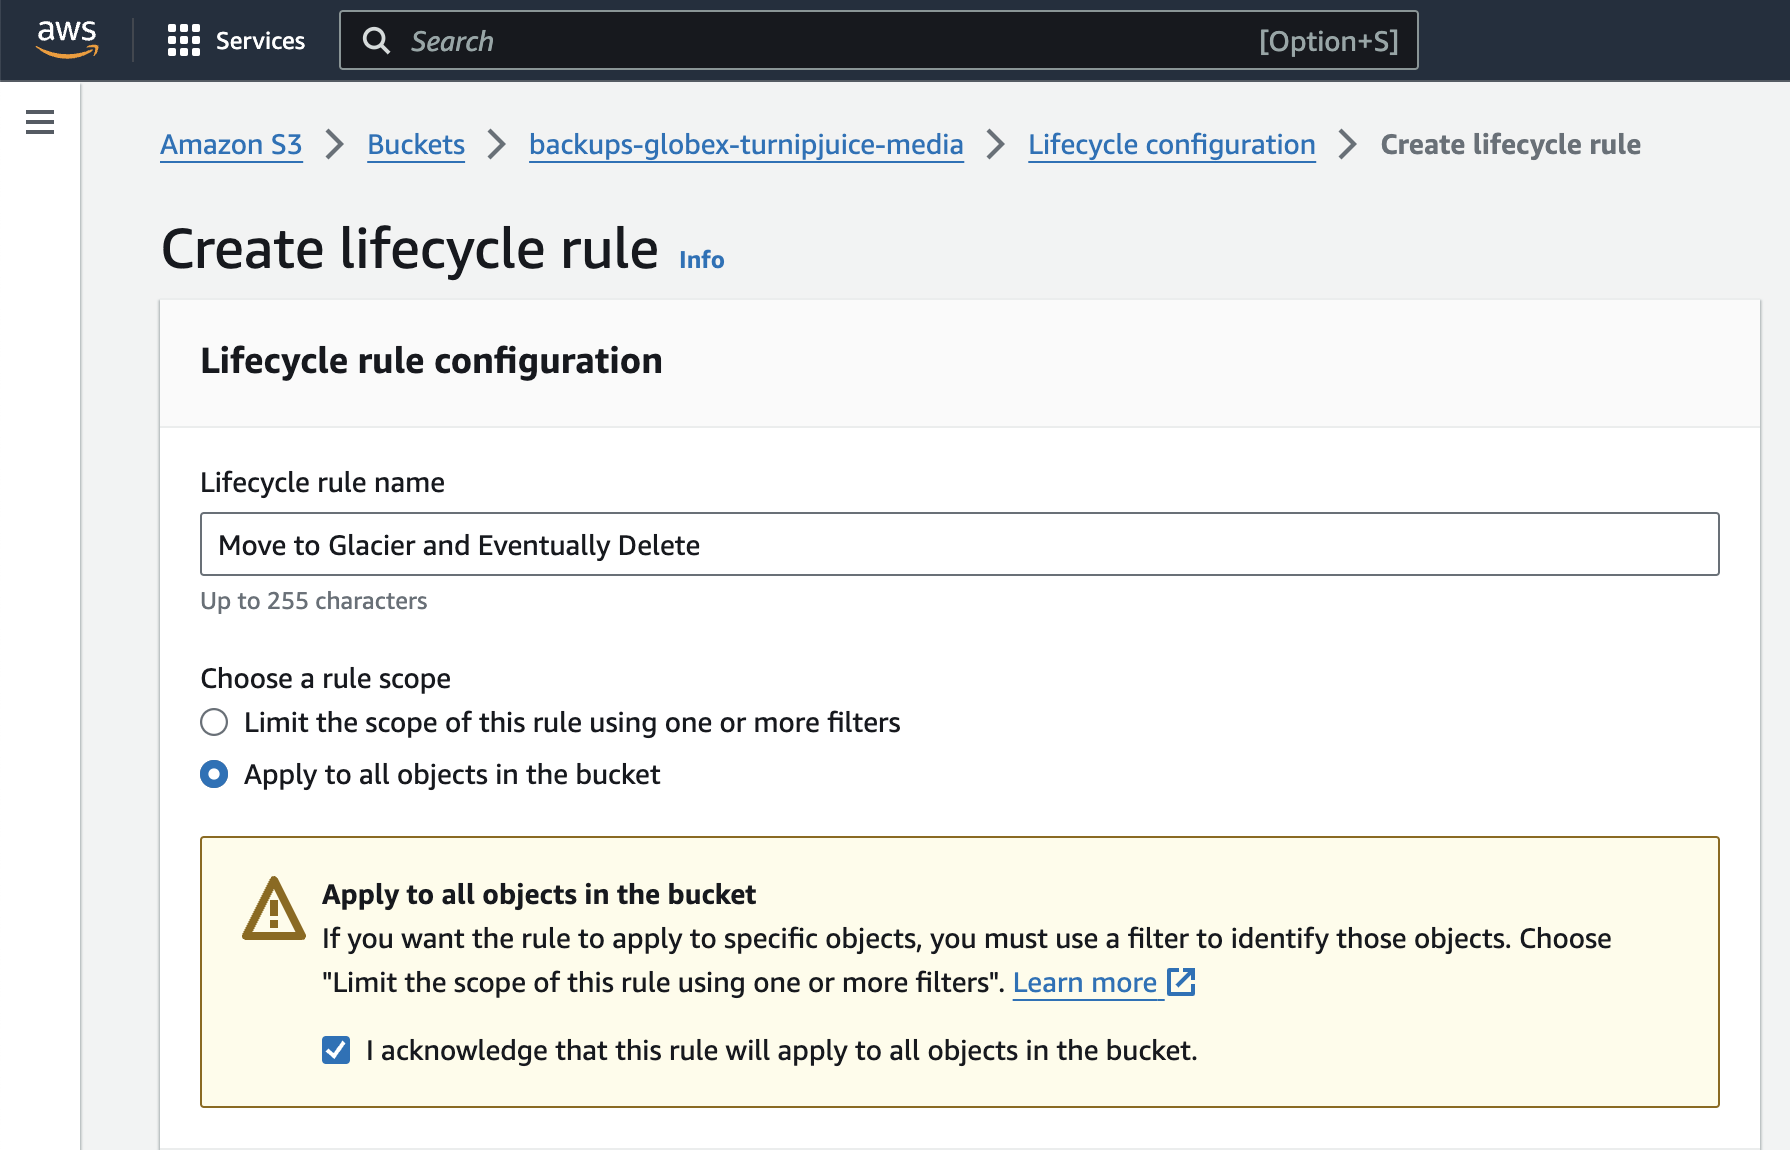 Screenshot of create lifecycle rule in AWS console.